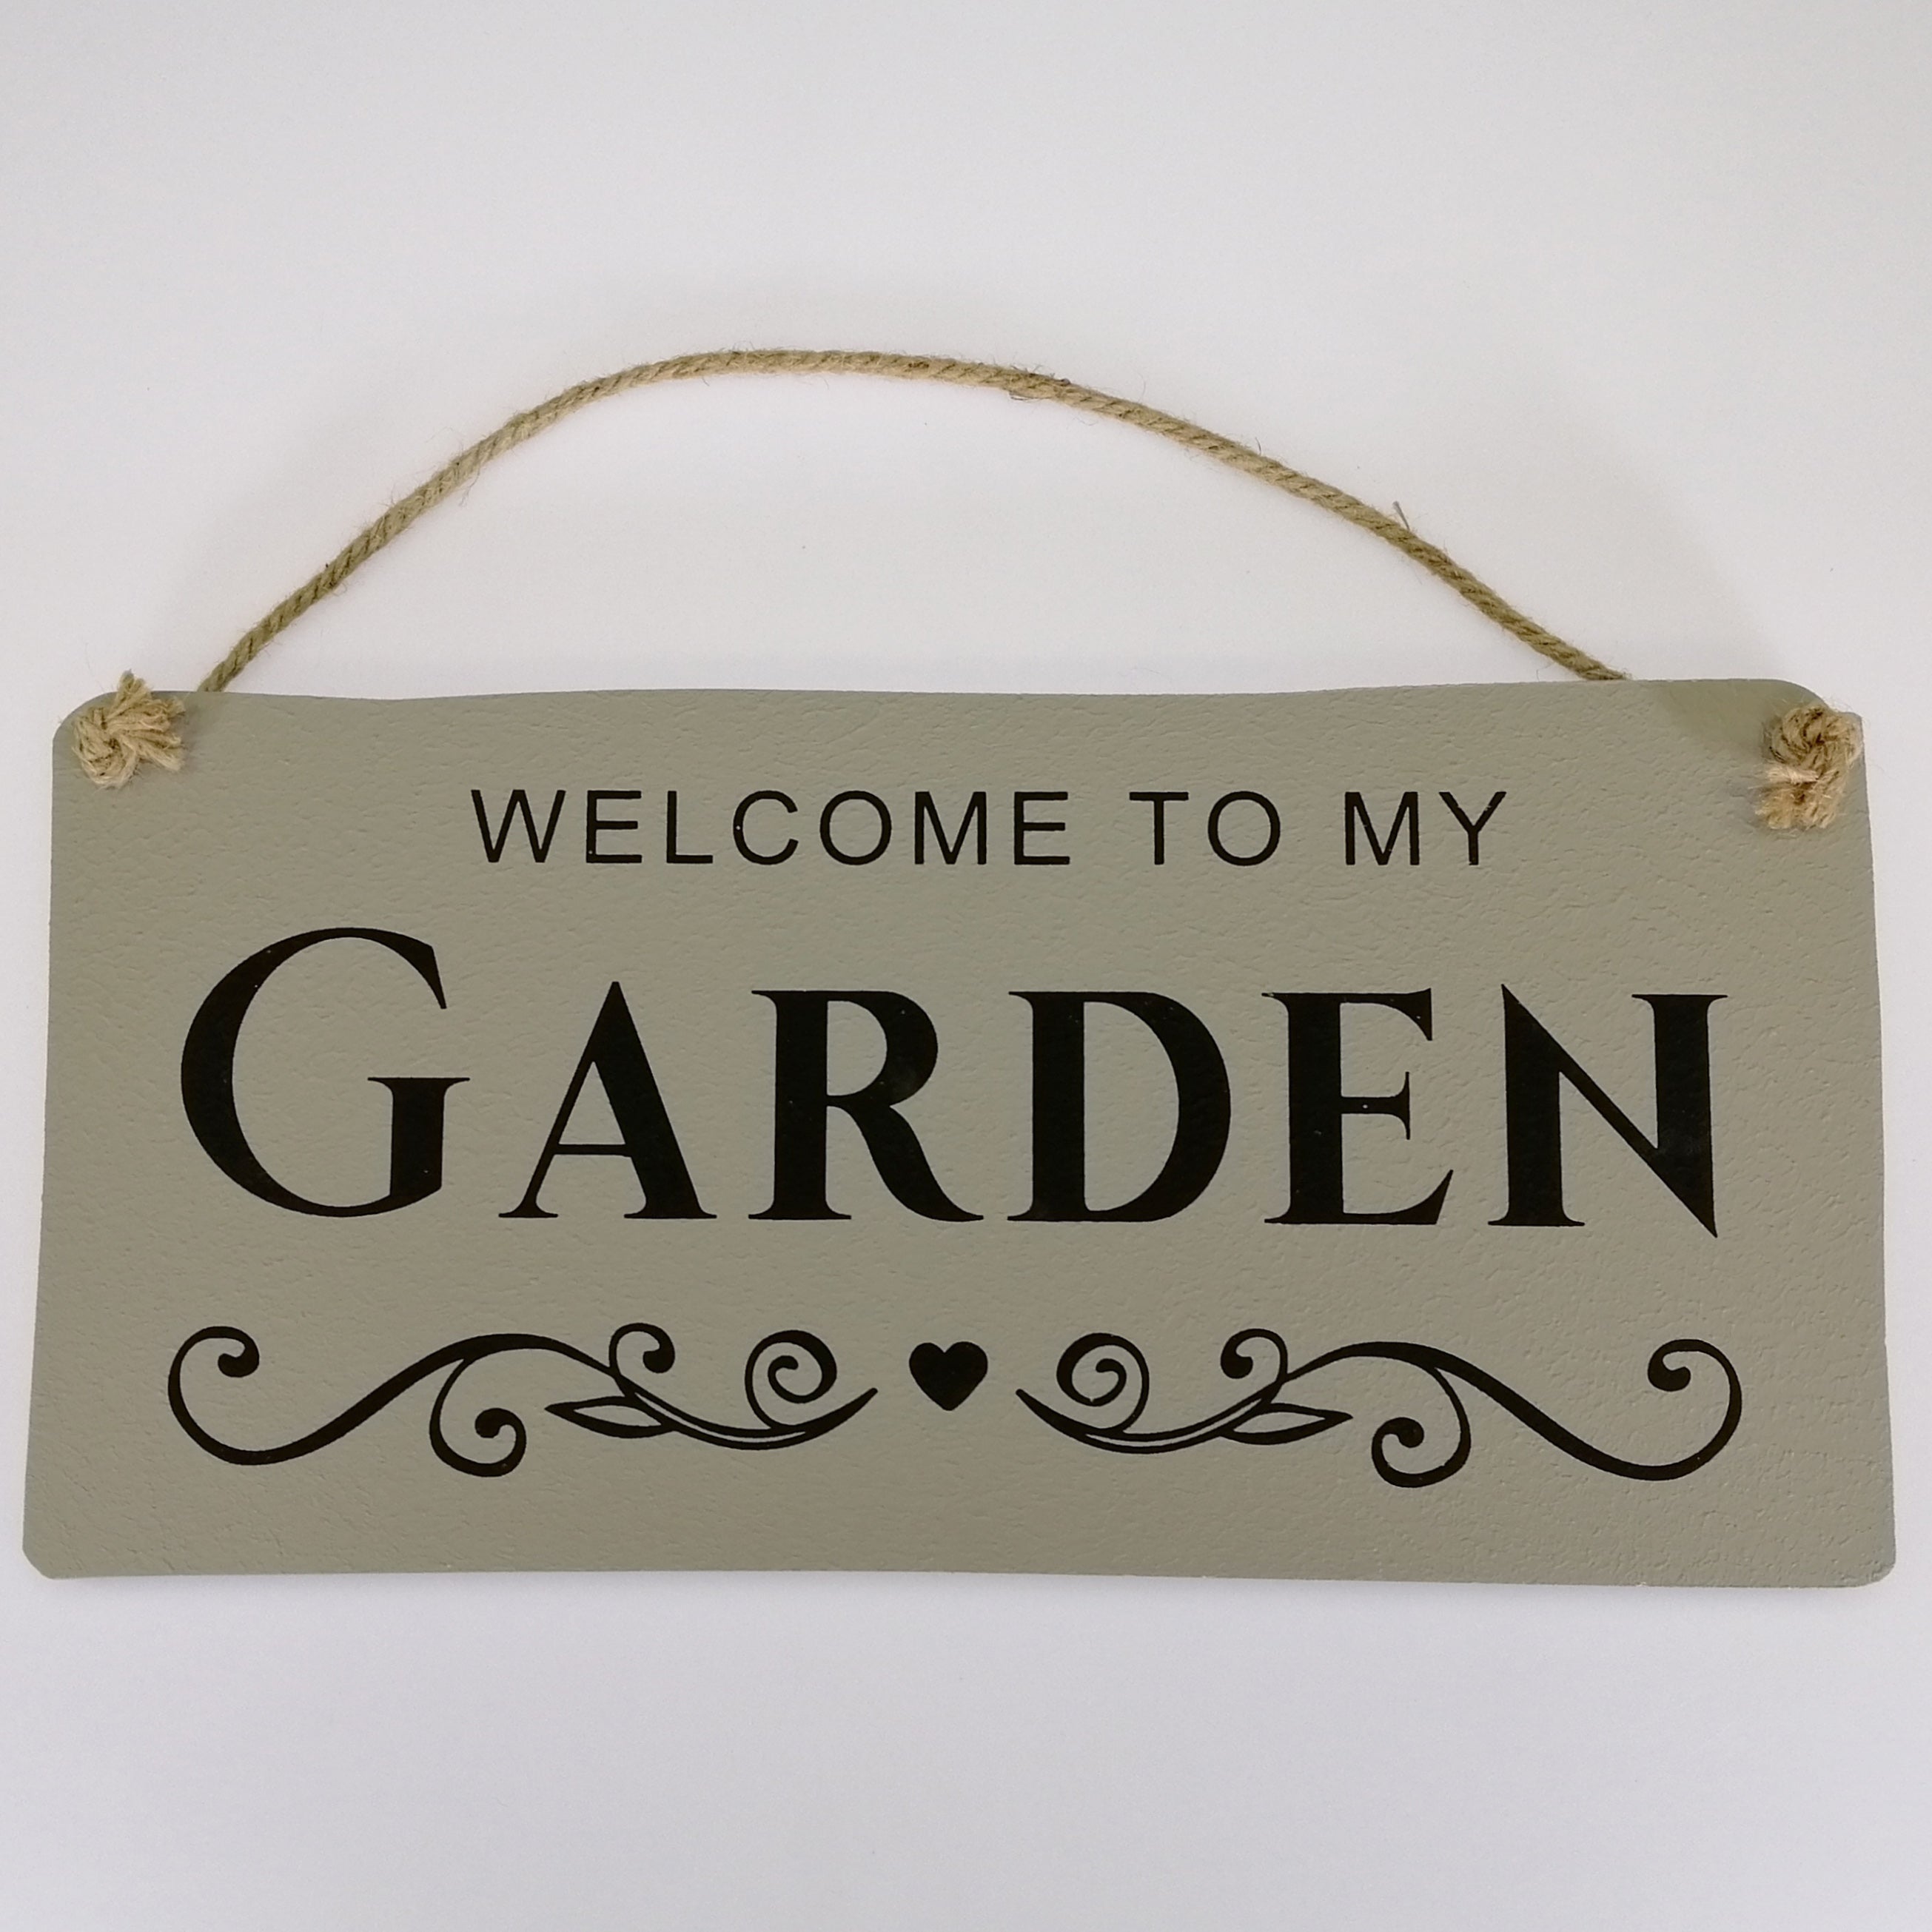 Welcome to my Garden' Rustic Plaque Sign